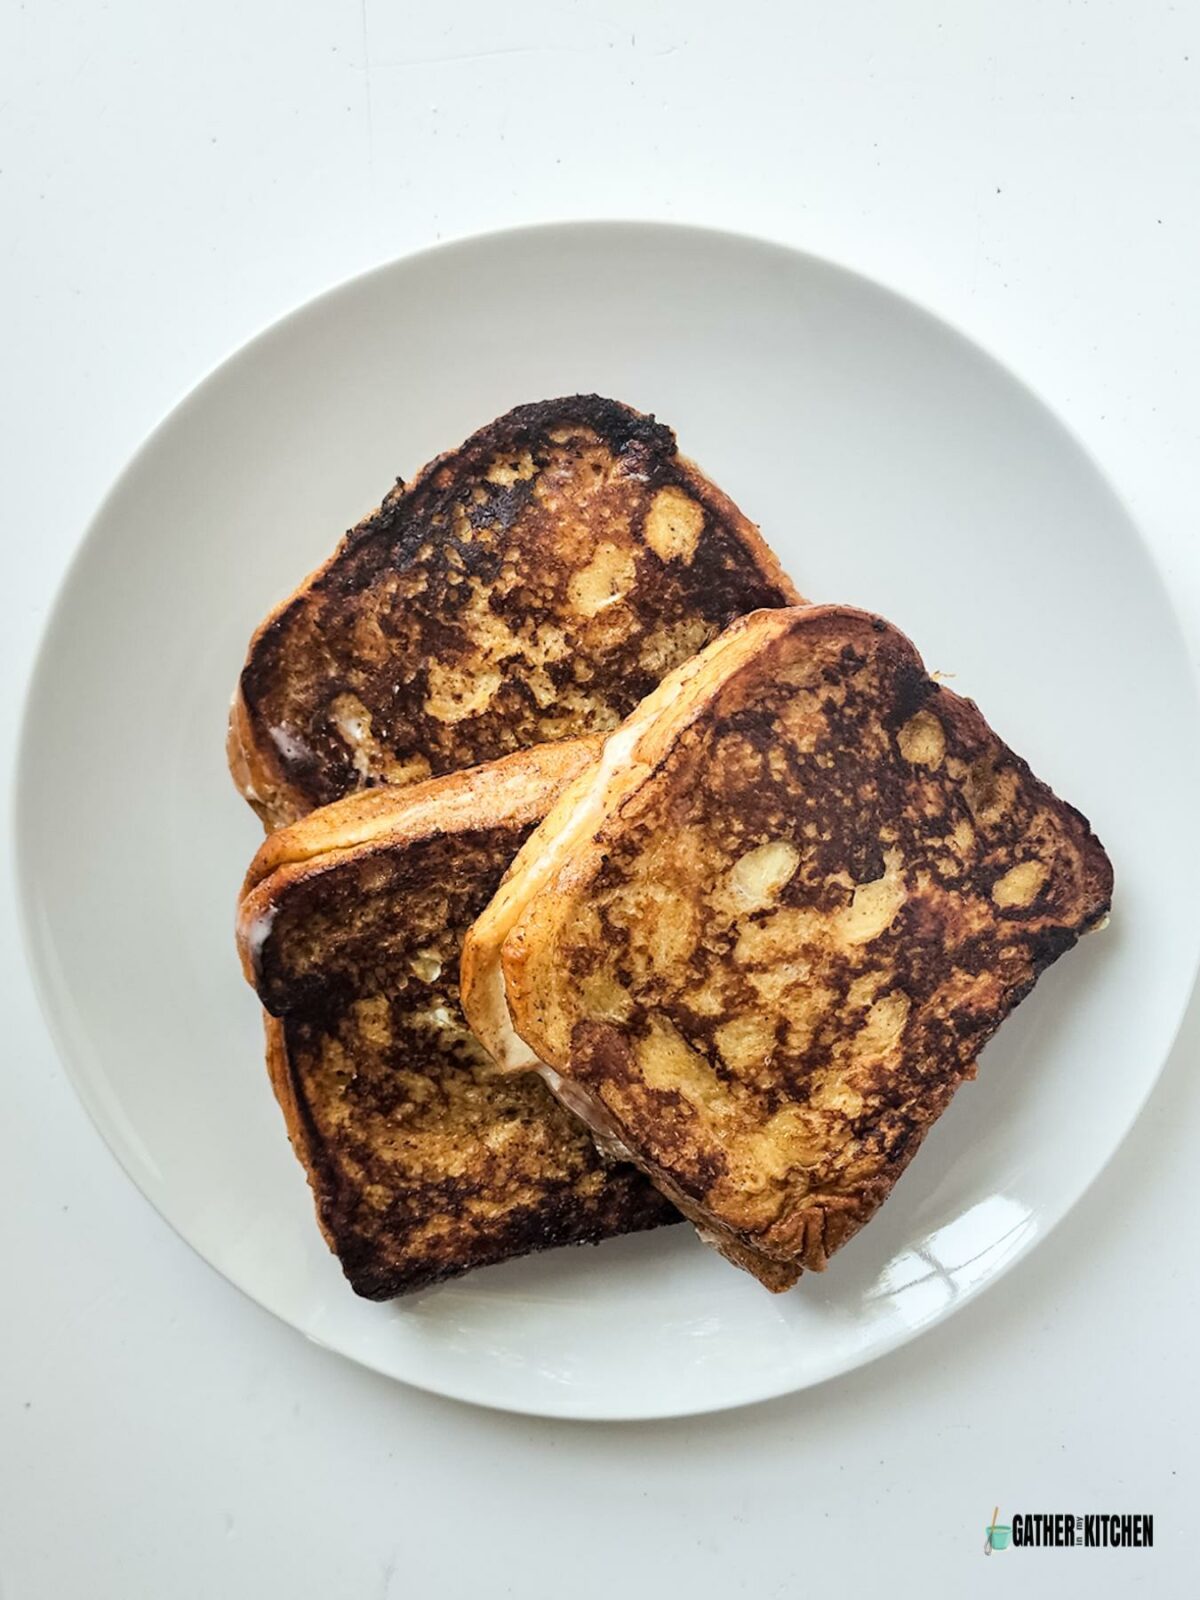 Pieces of french toast on a plate.